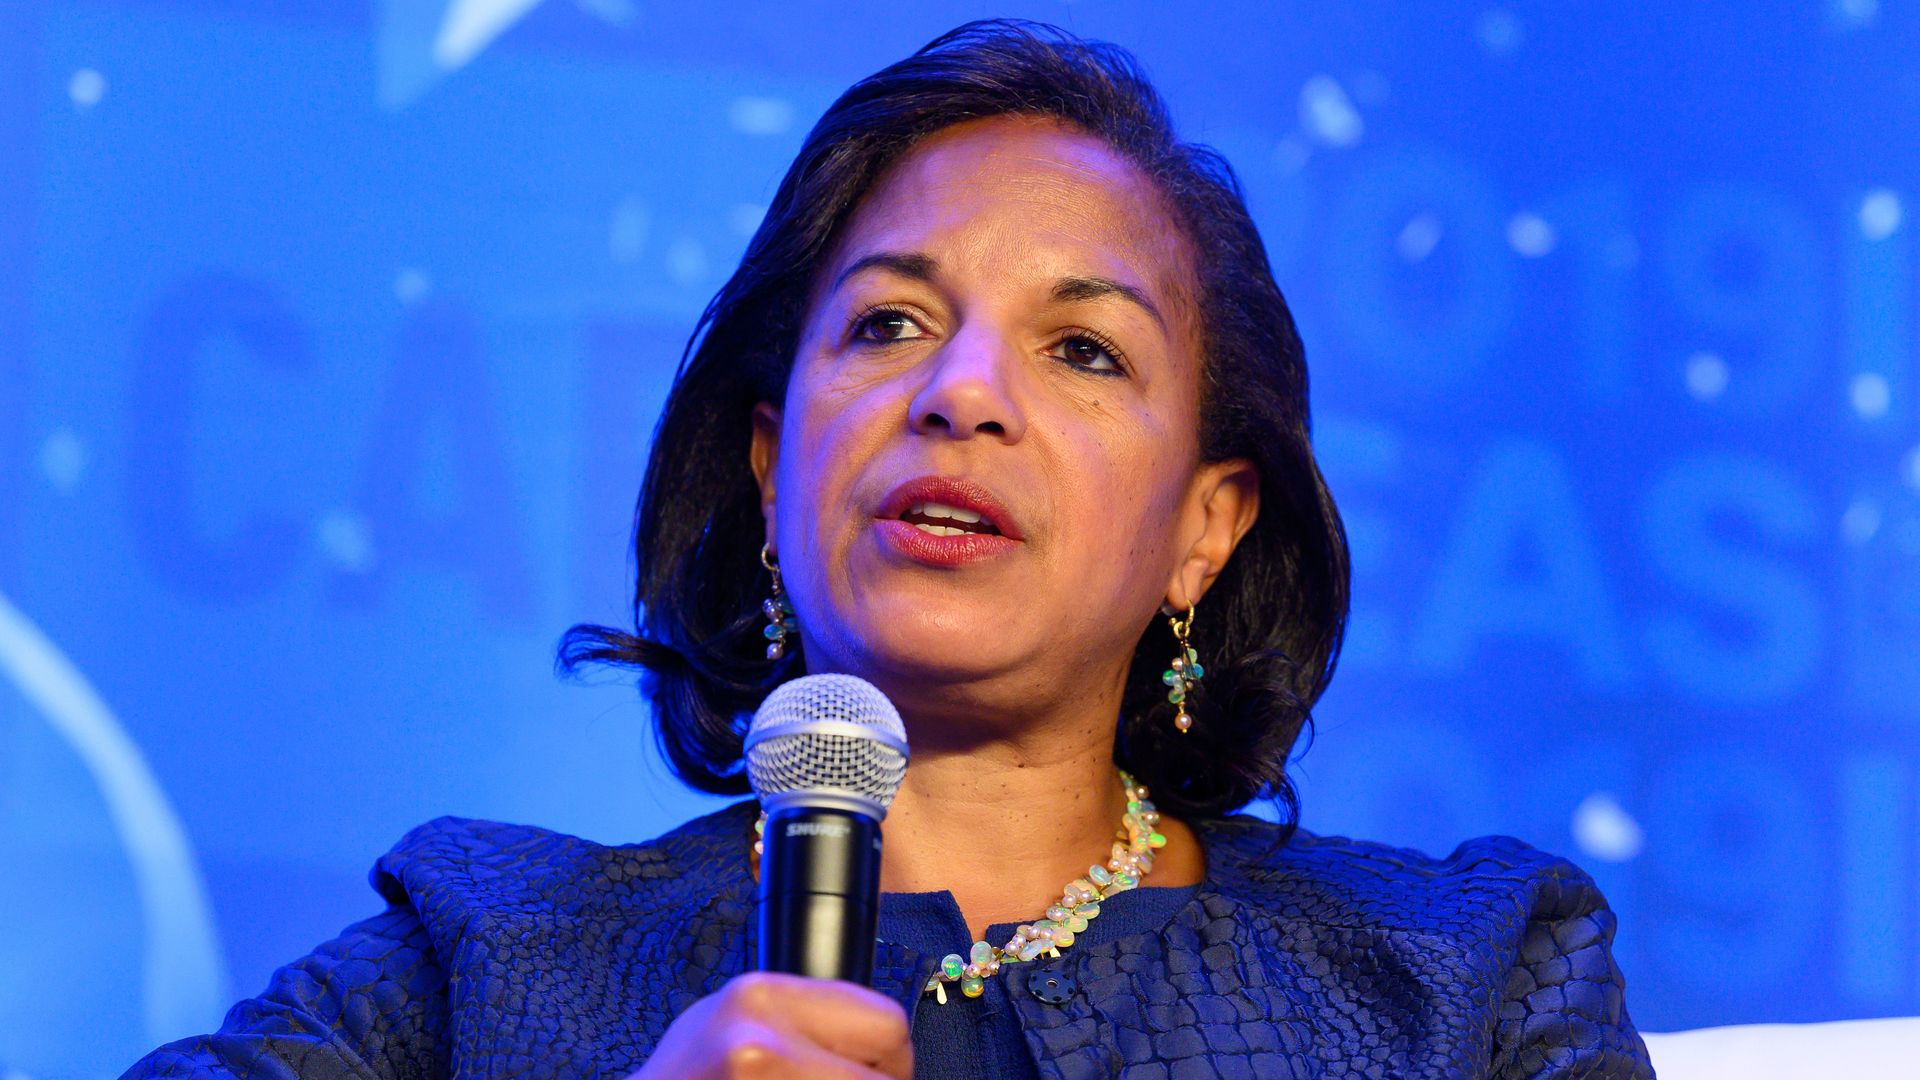 Ambassador Susan Rice holds a microphone as she speaks at an event